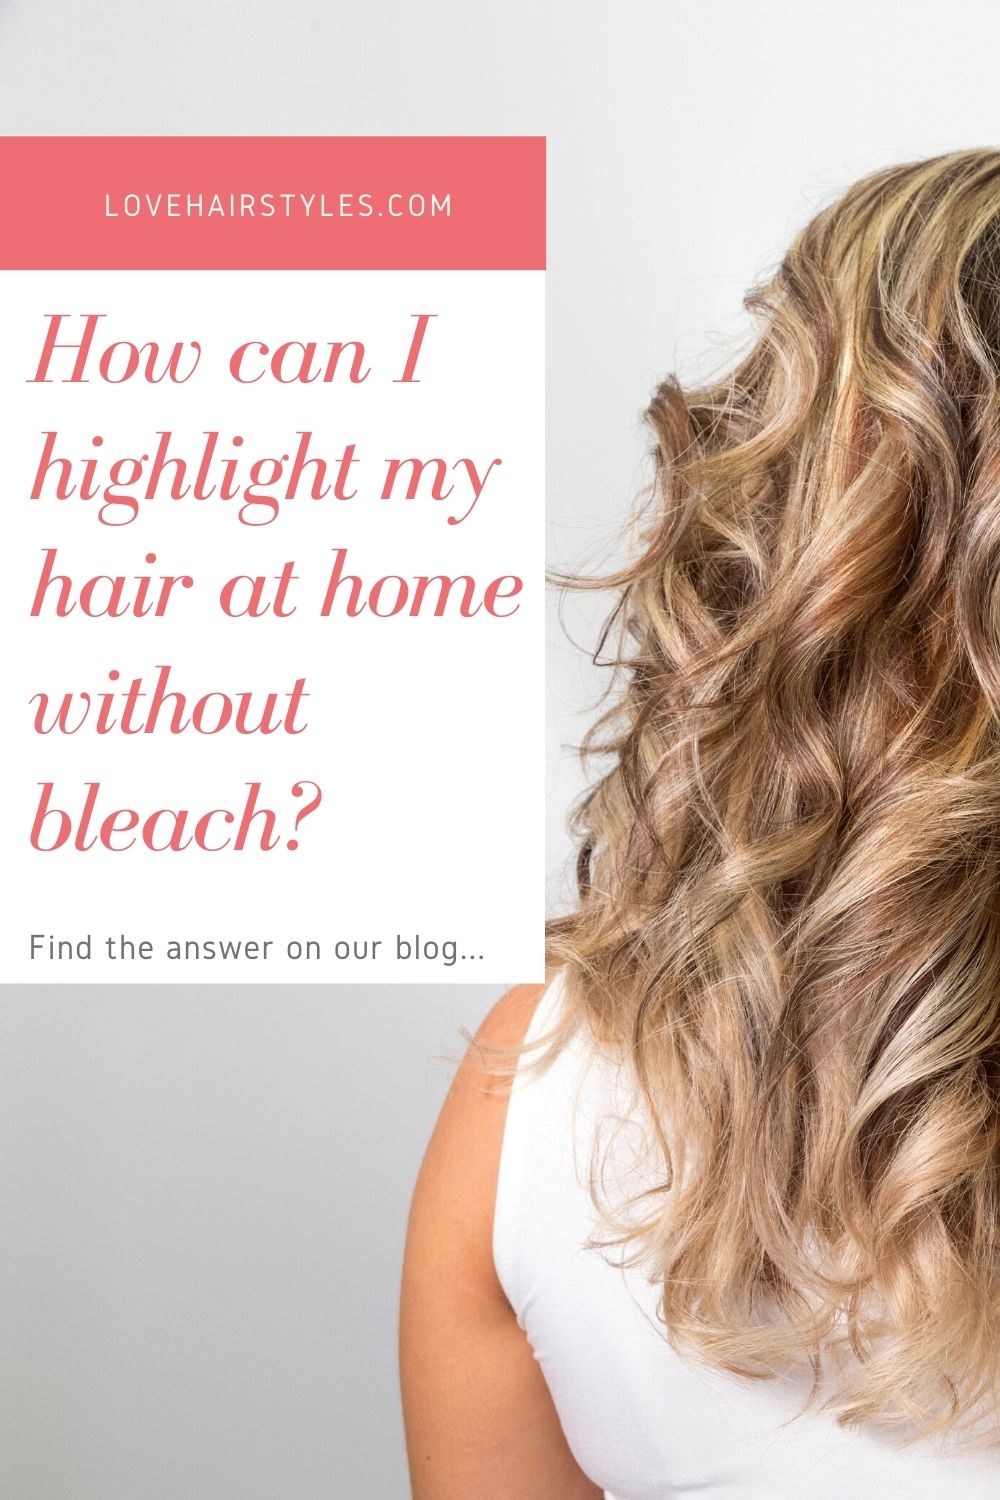 How can I highlight my hair at home without bleach?